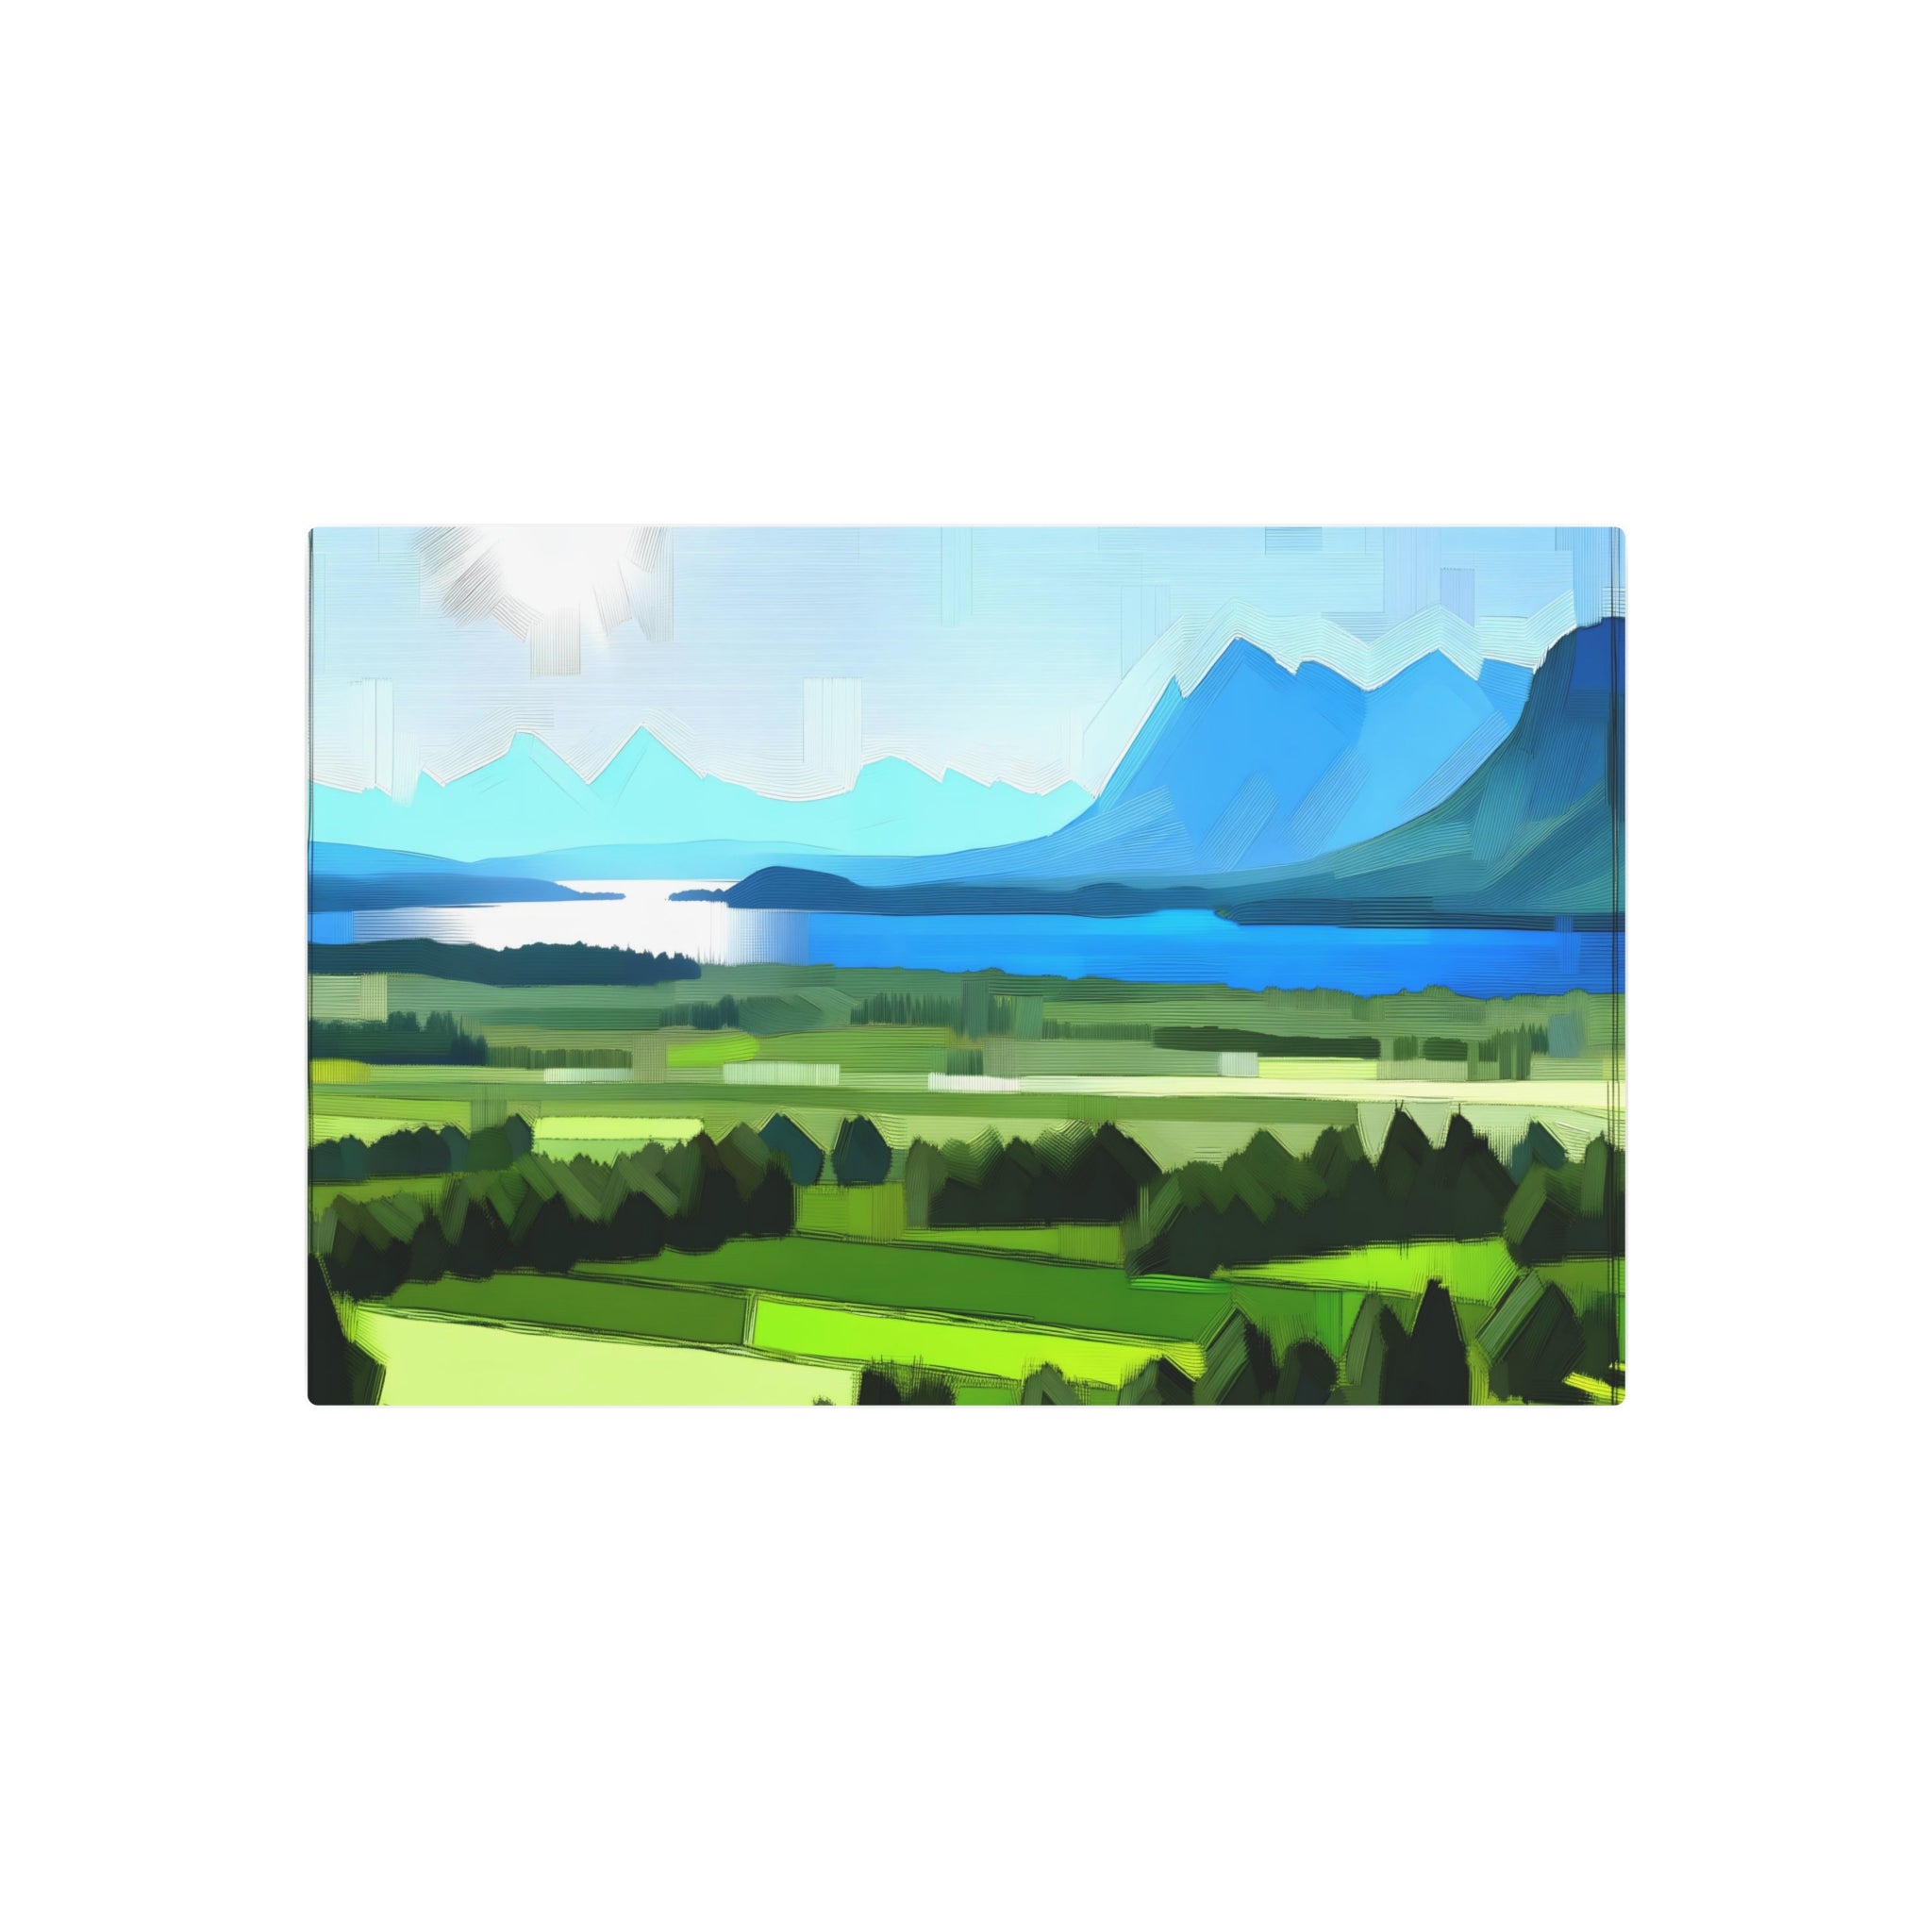 Metal Poster Art | "Realism Western Art Style: Sunlit Landscape with Verdant Fields, Tranquil Blue Lake and Towering Mountains - Detailed Real World Representation"